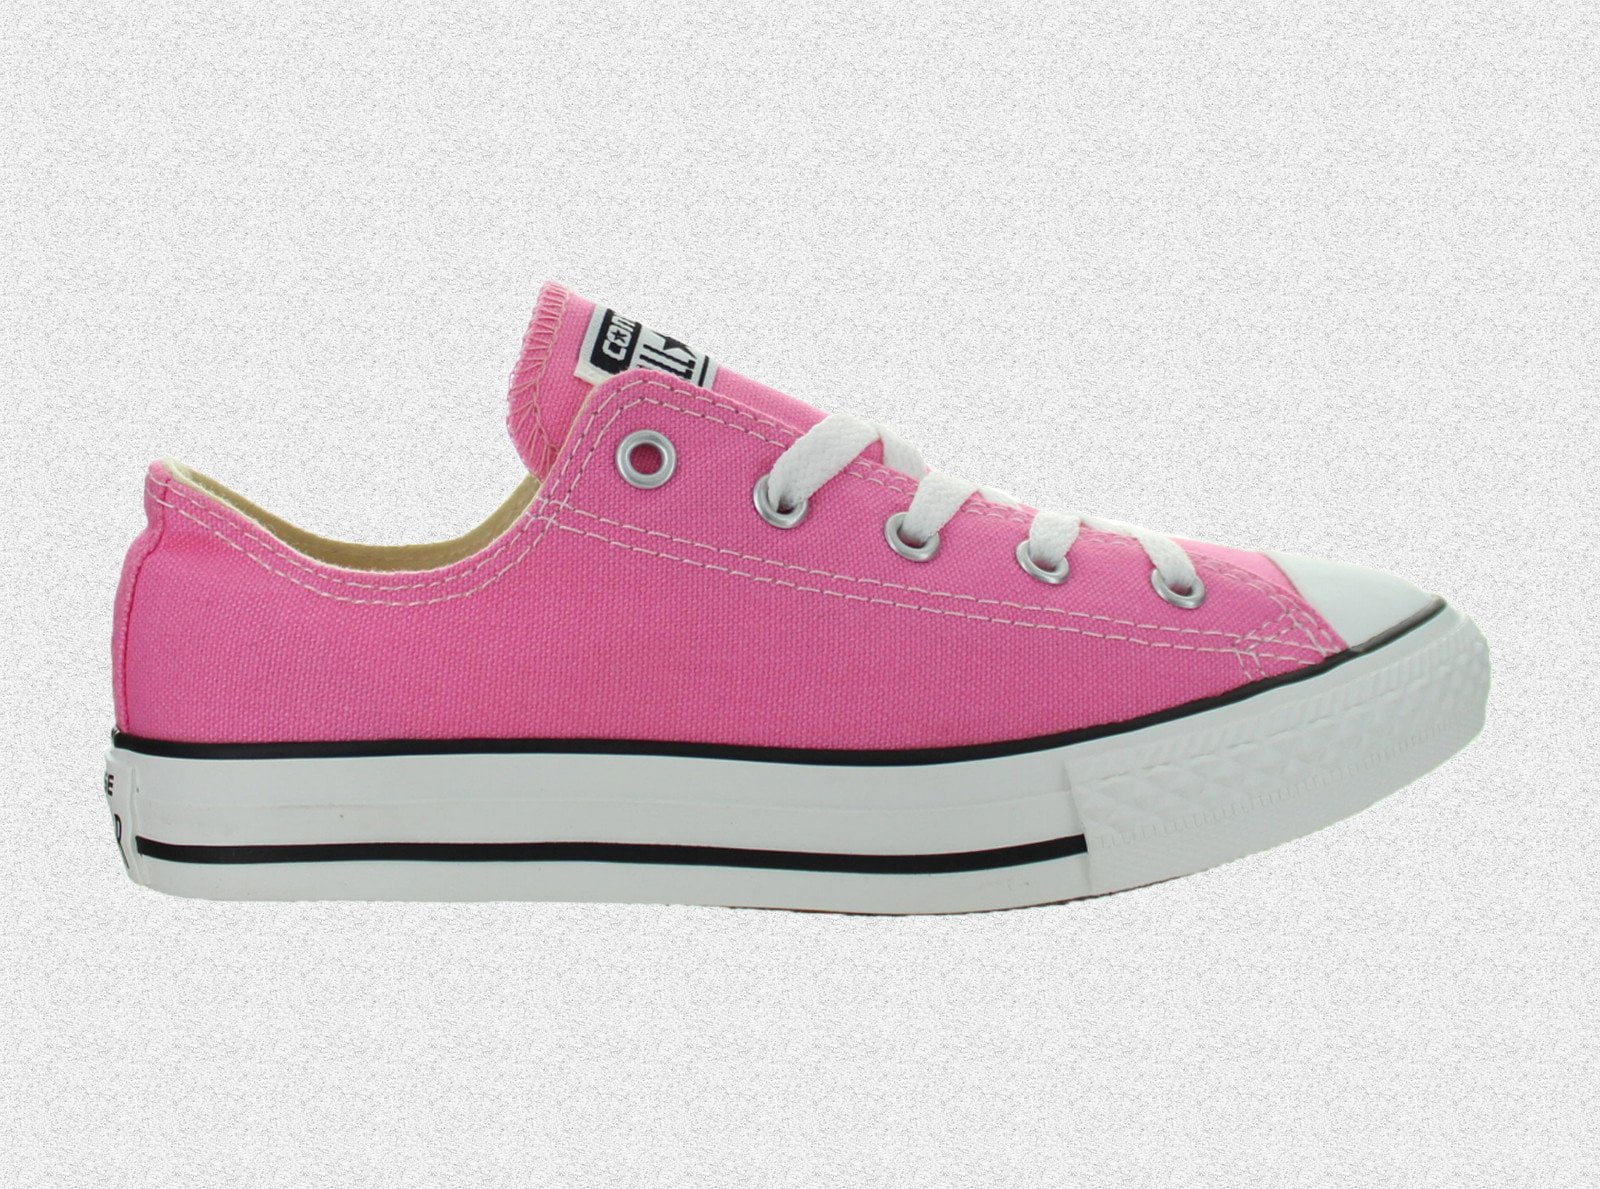 Buy > pink converse for baby girl > in stock